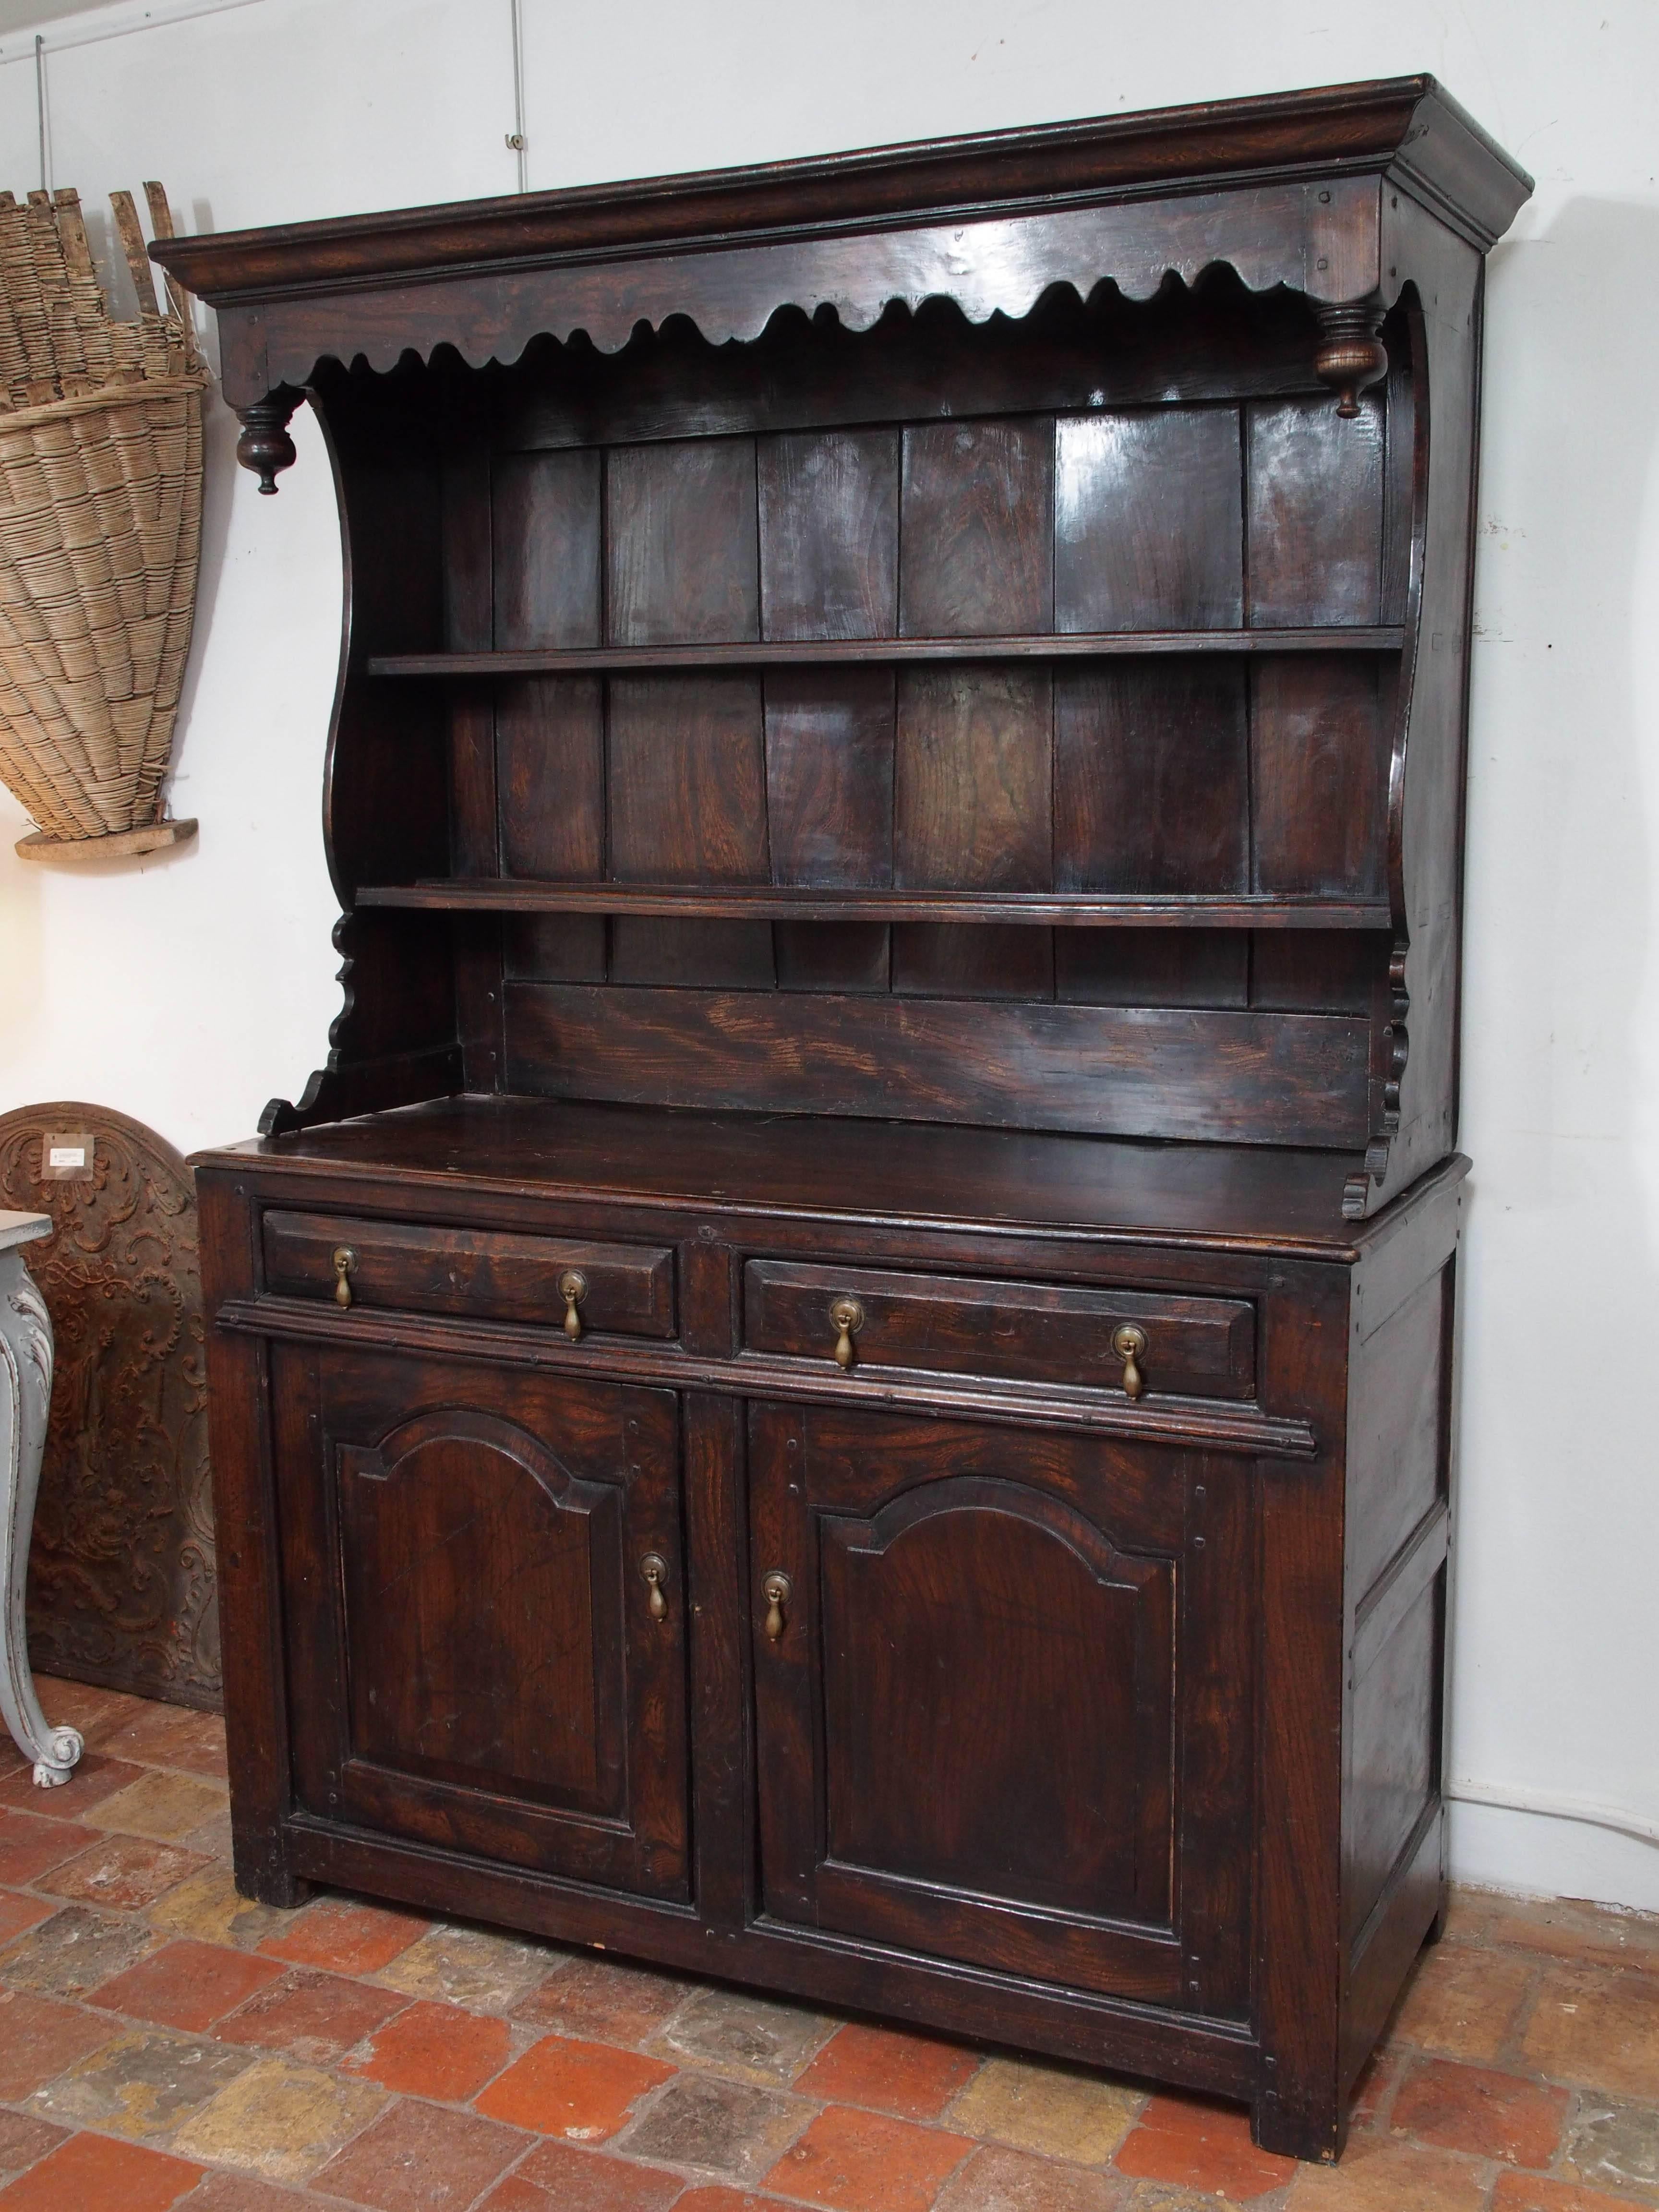 18th century English oak and chestnut cottage hutch with two doors and two drawers, circa 1780.